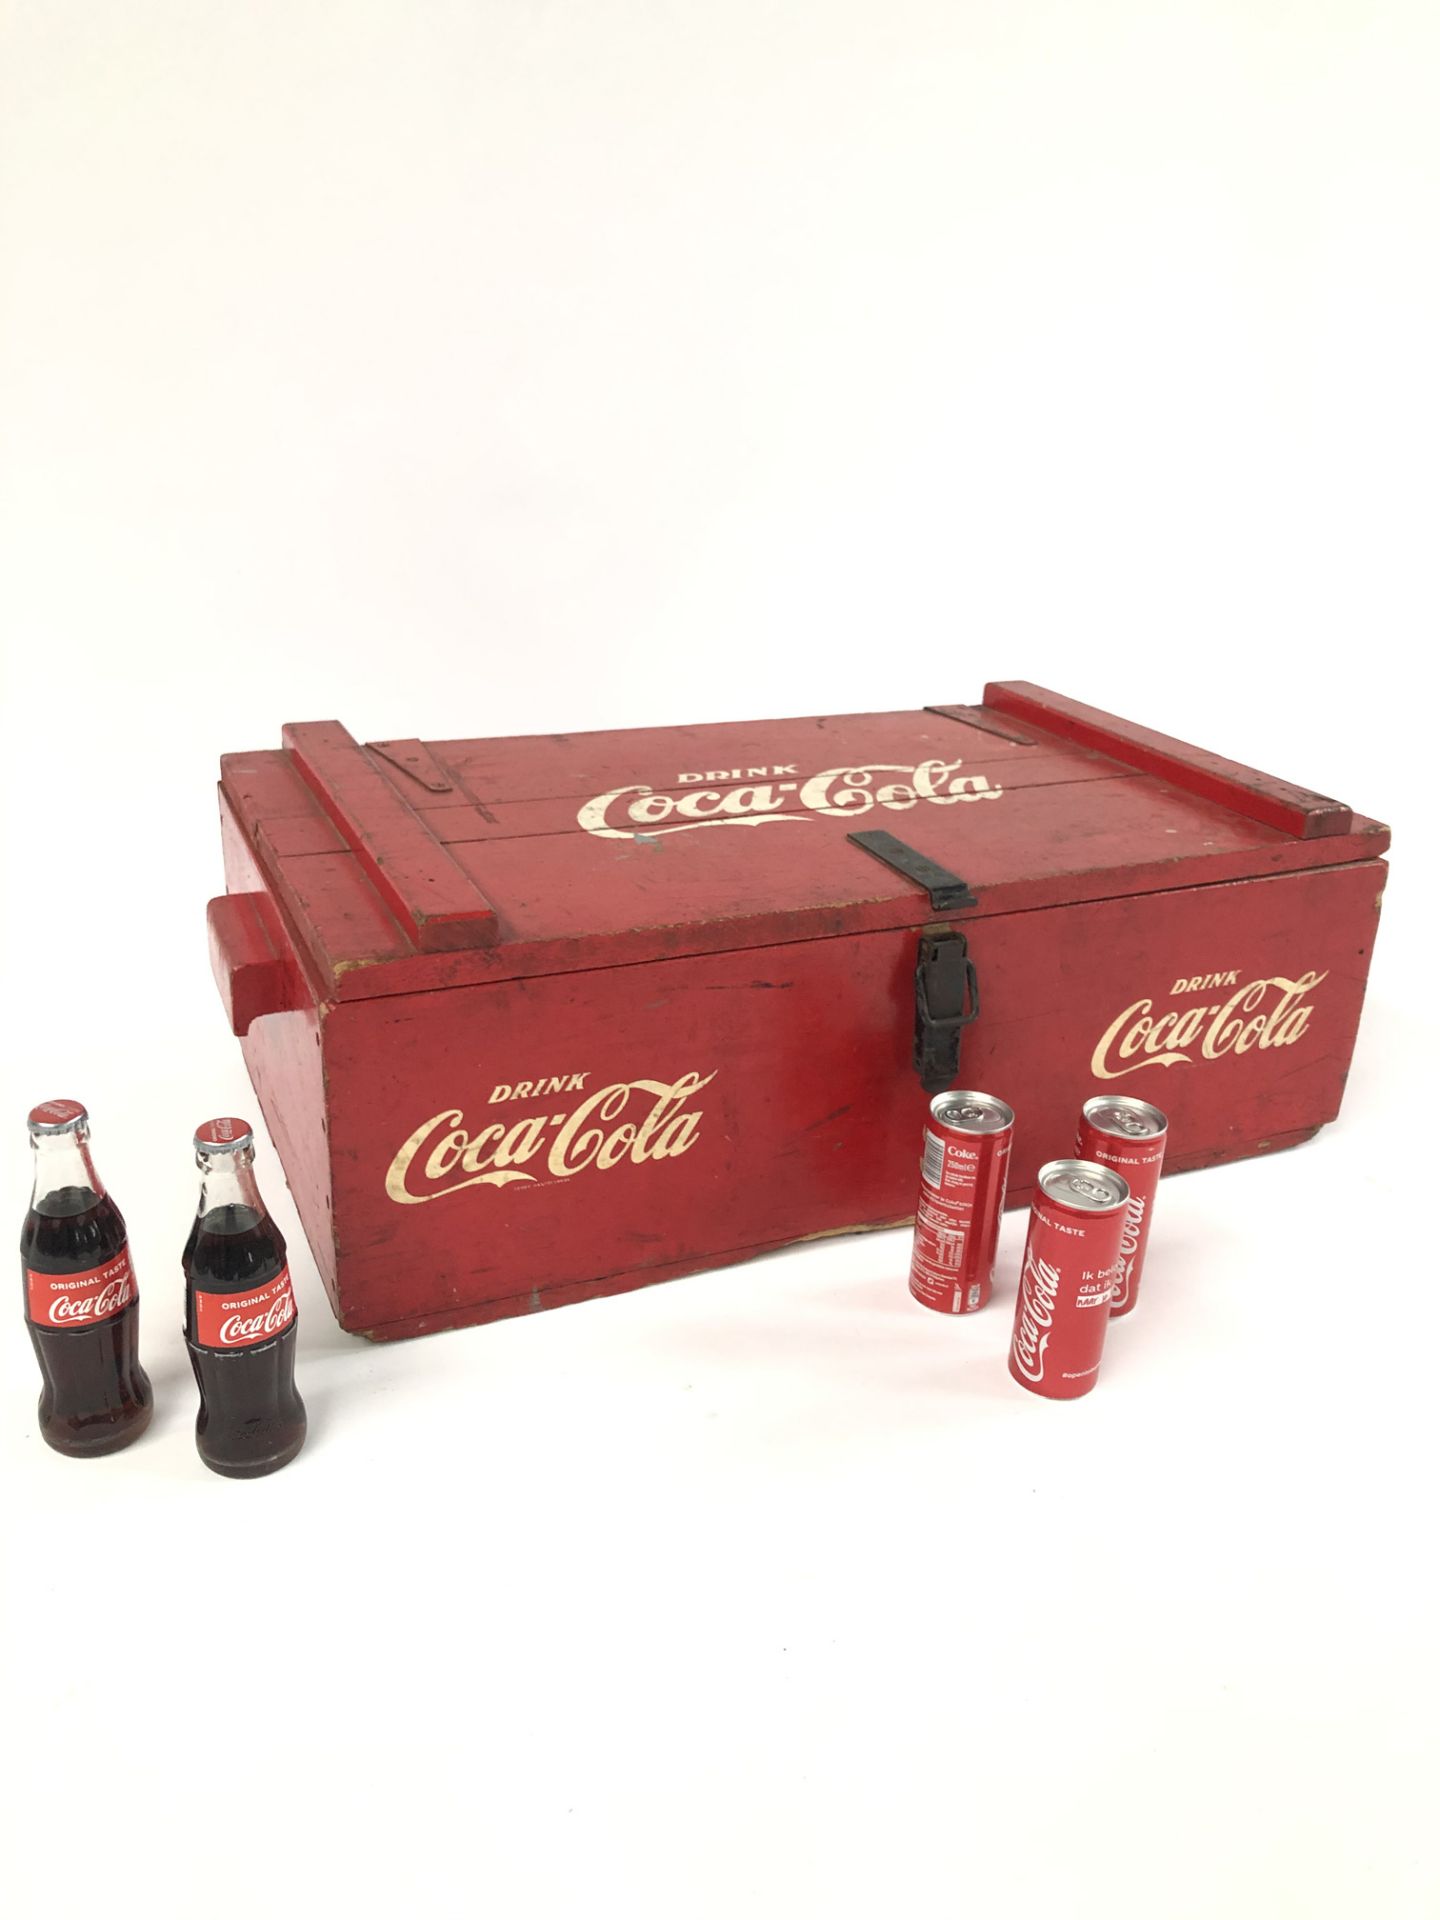 Original Coca-Cola Wooden Ice Box from Netherlands - Image 2 of 5